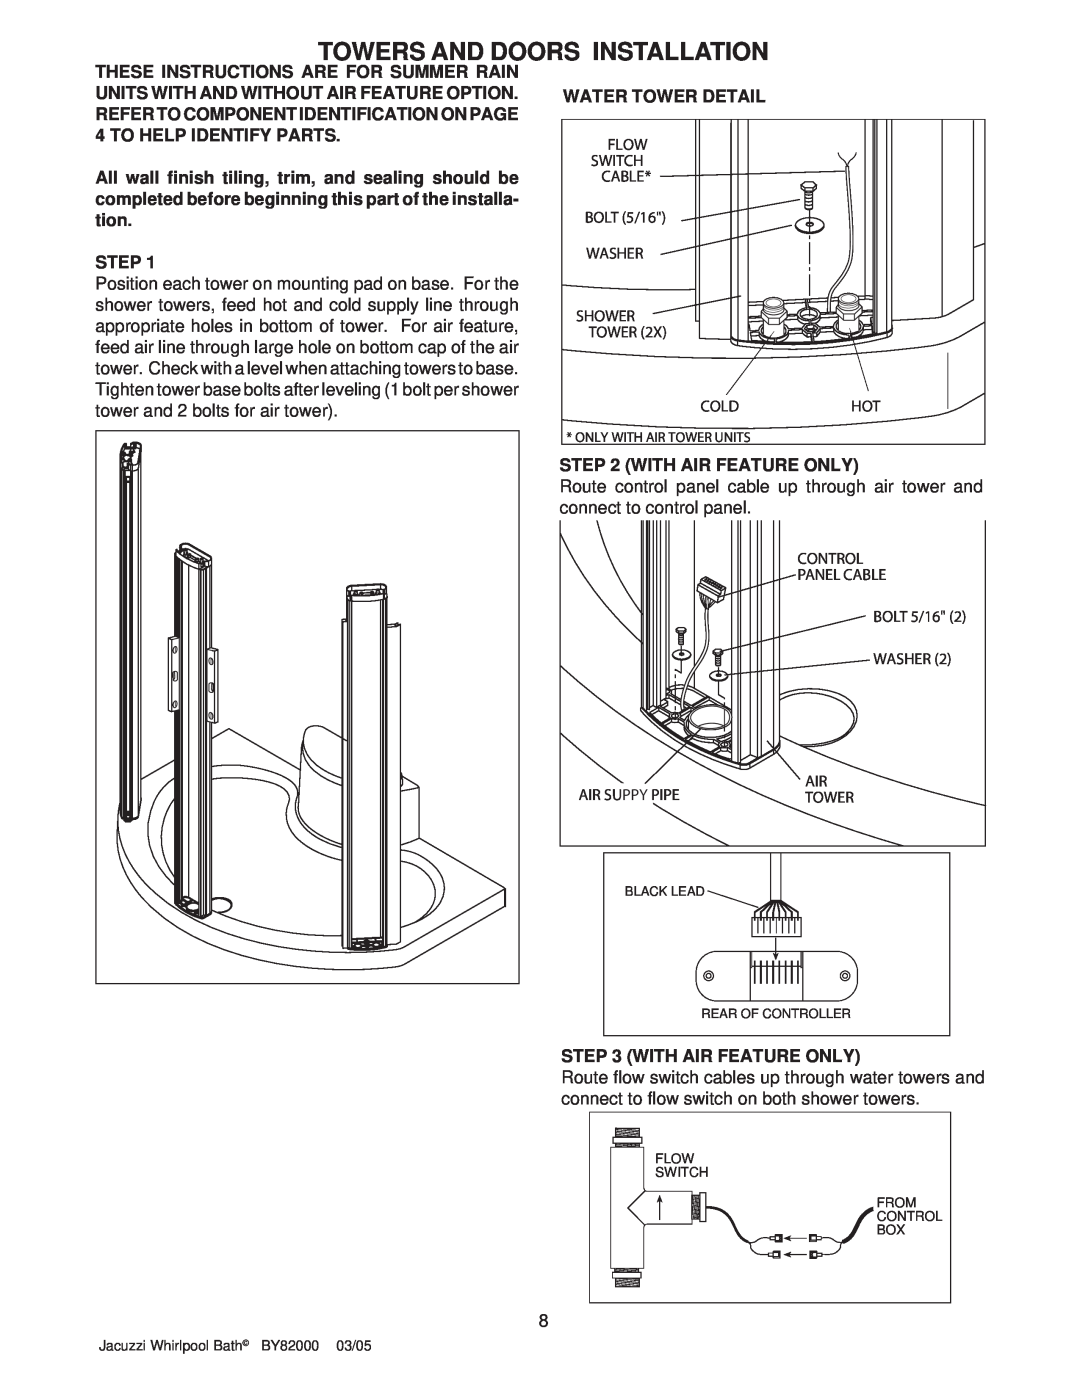 Jacuzzi BY82000 manual Towers And Doors Installation, These Instructions Are For Summer Rain, Water Tower Detail, Step 